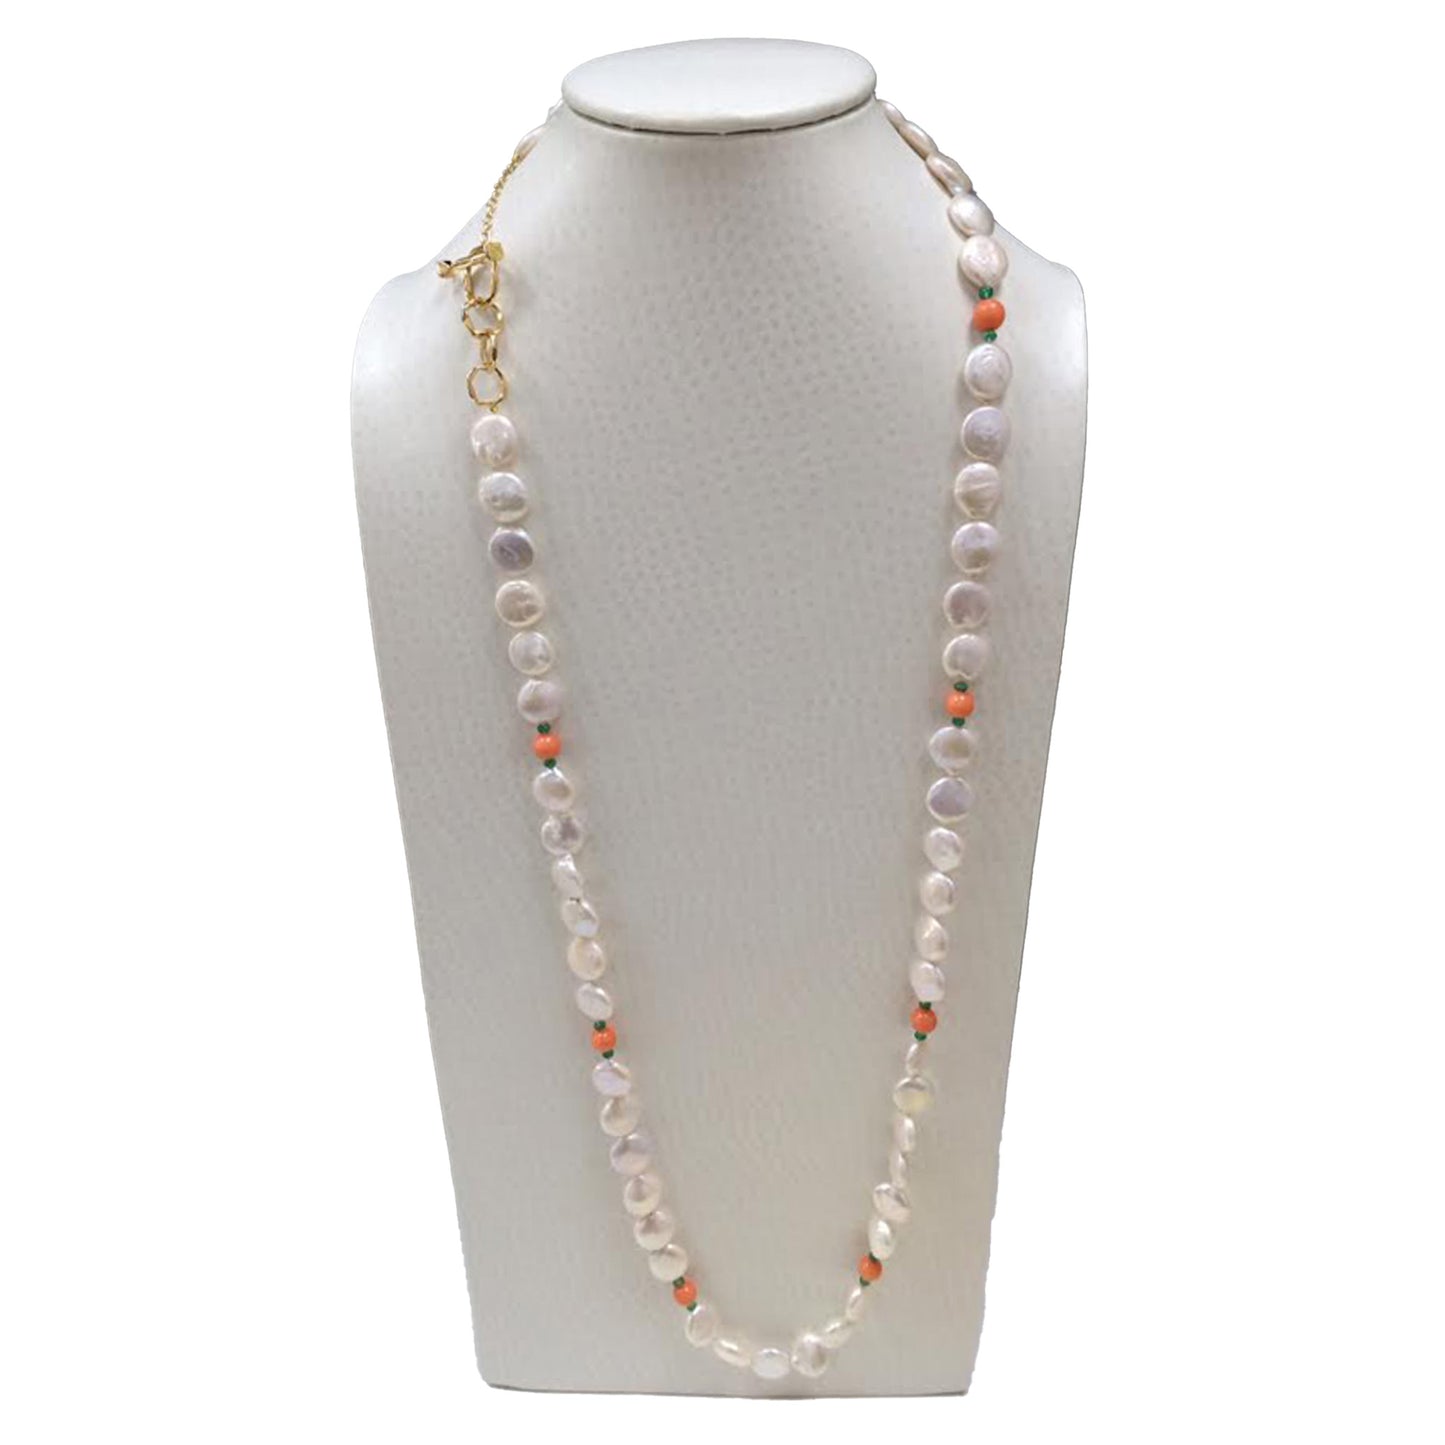 White Coin Pearl & Coral Bead Necklace